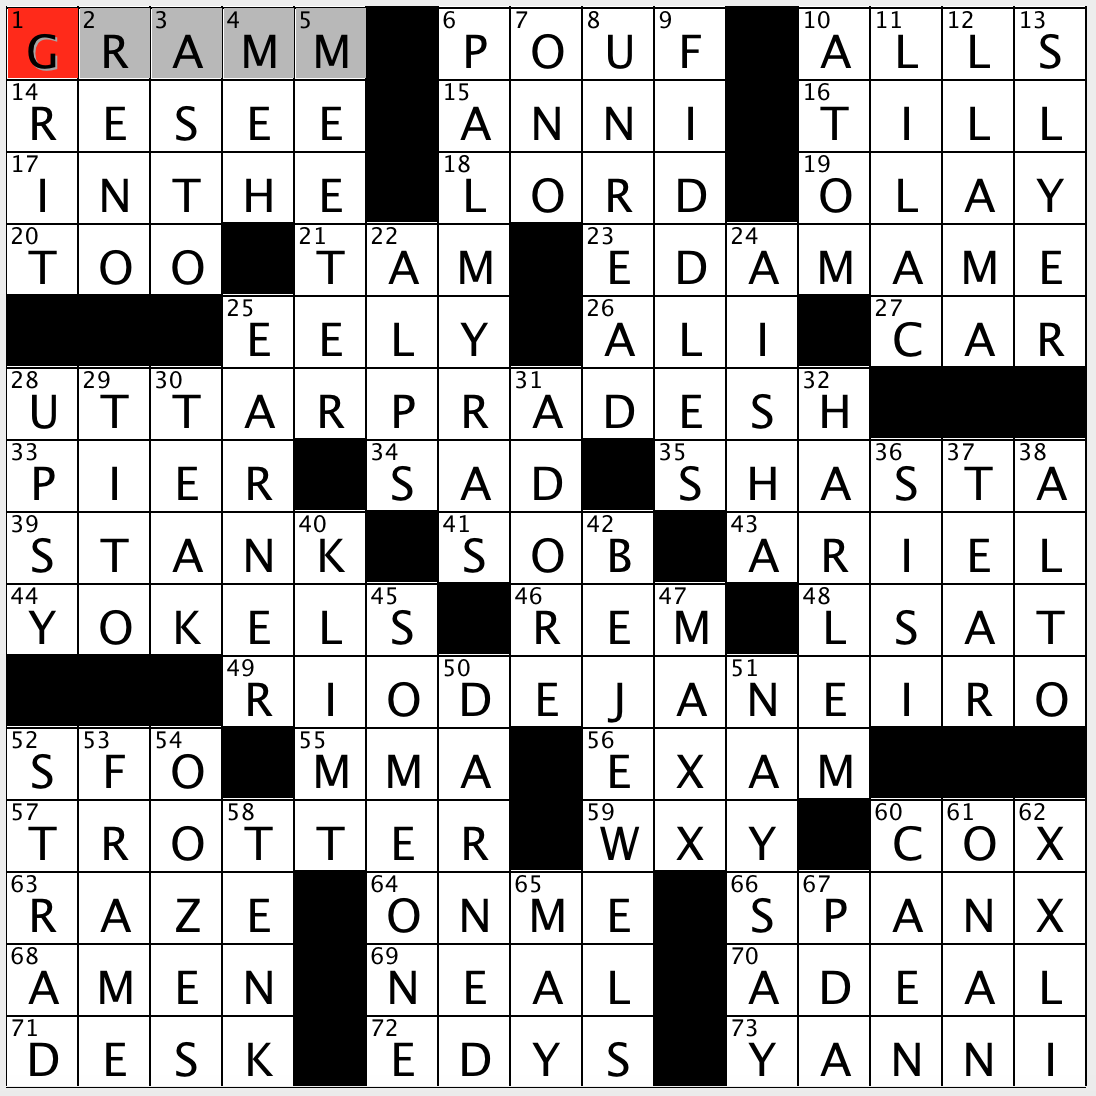 Final Result Crossword Clue 5 Letters SULTRO